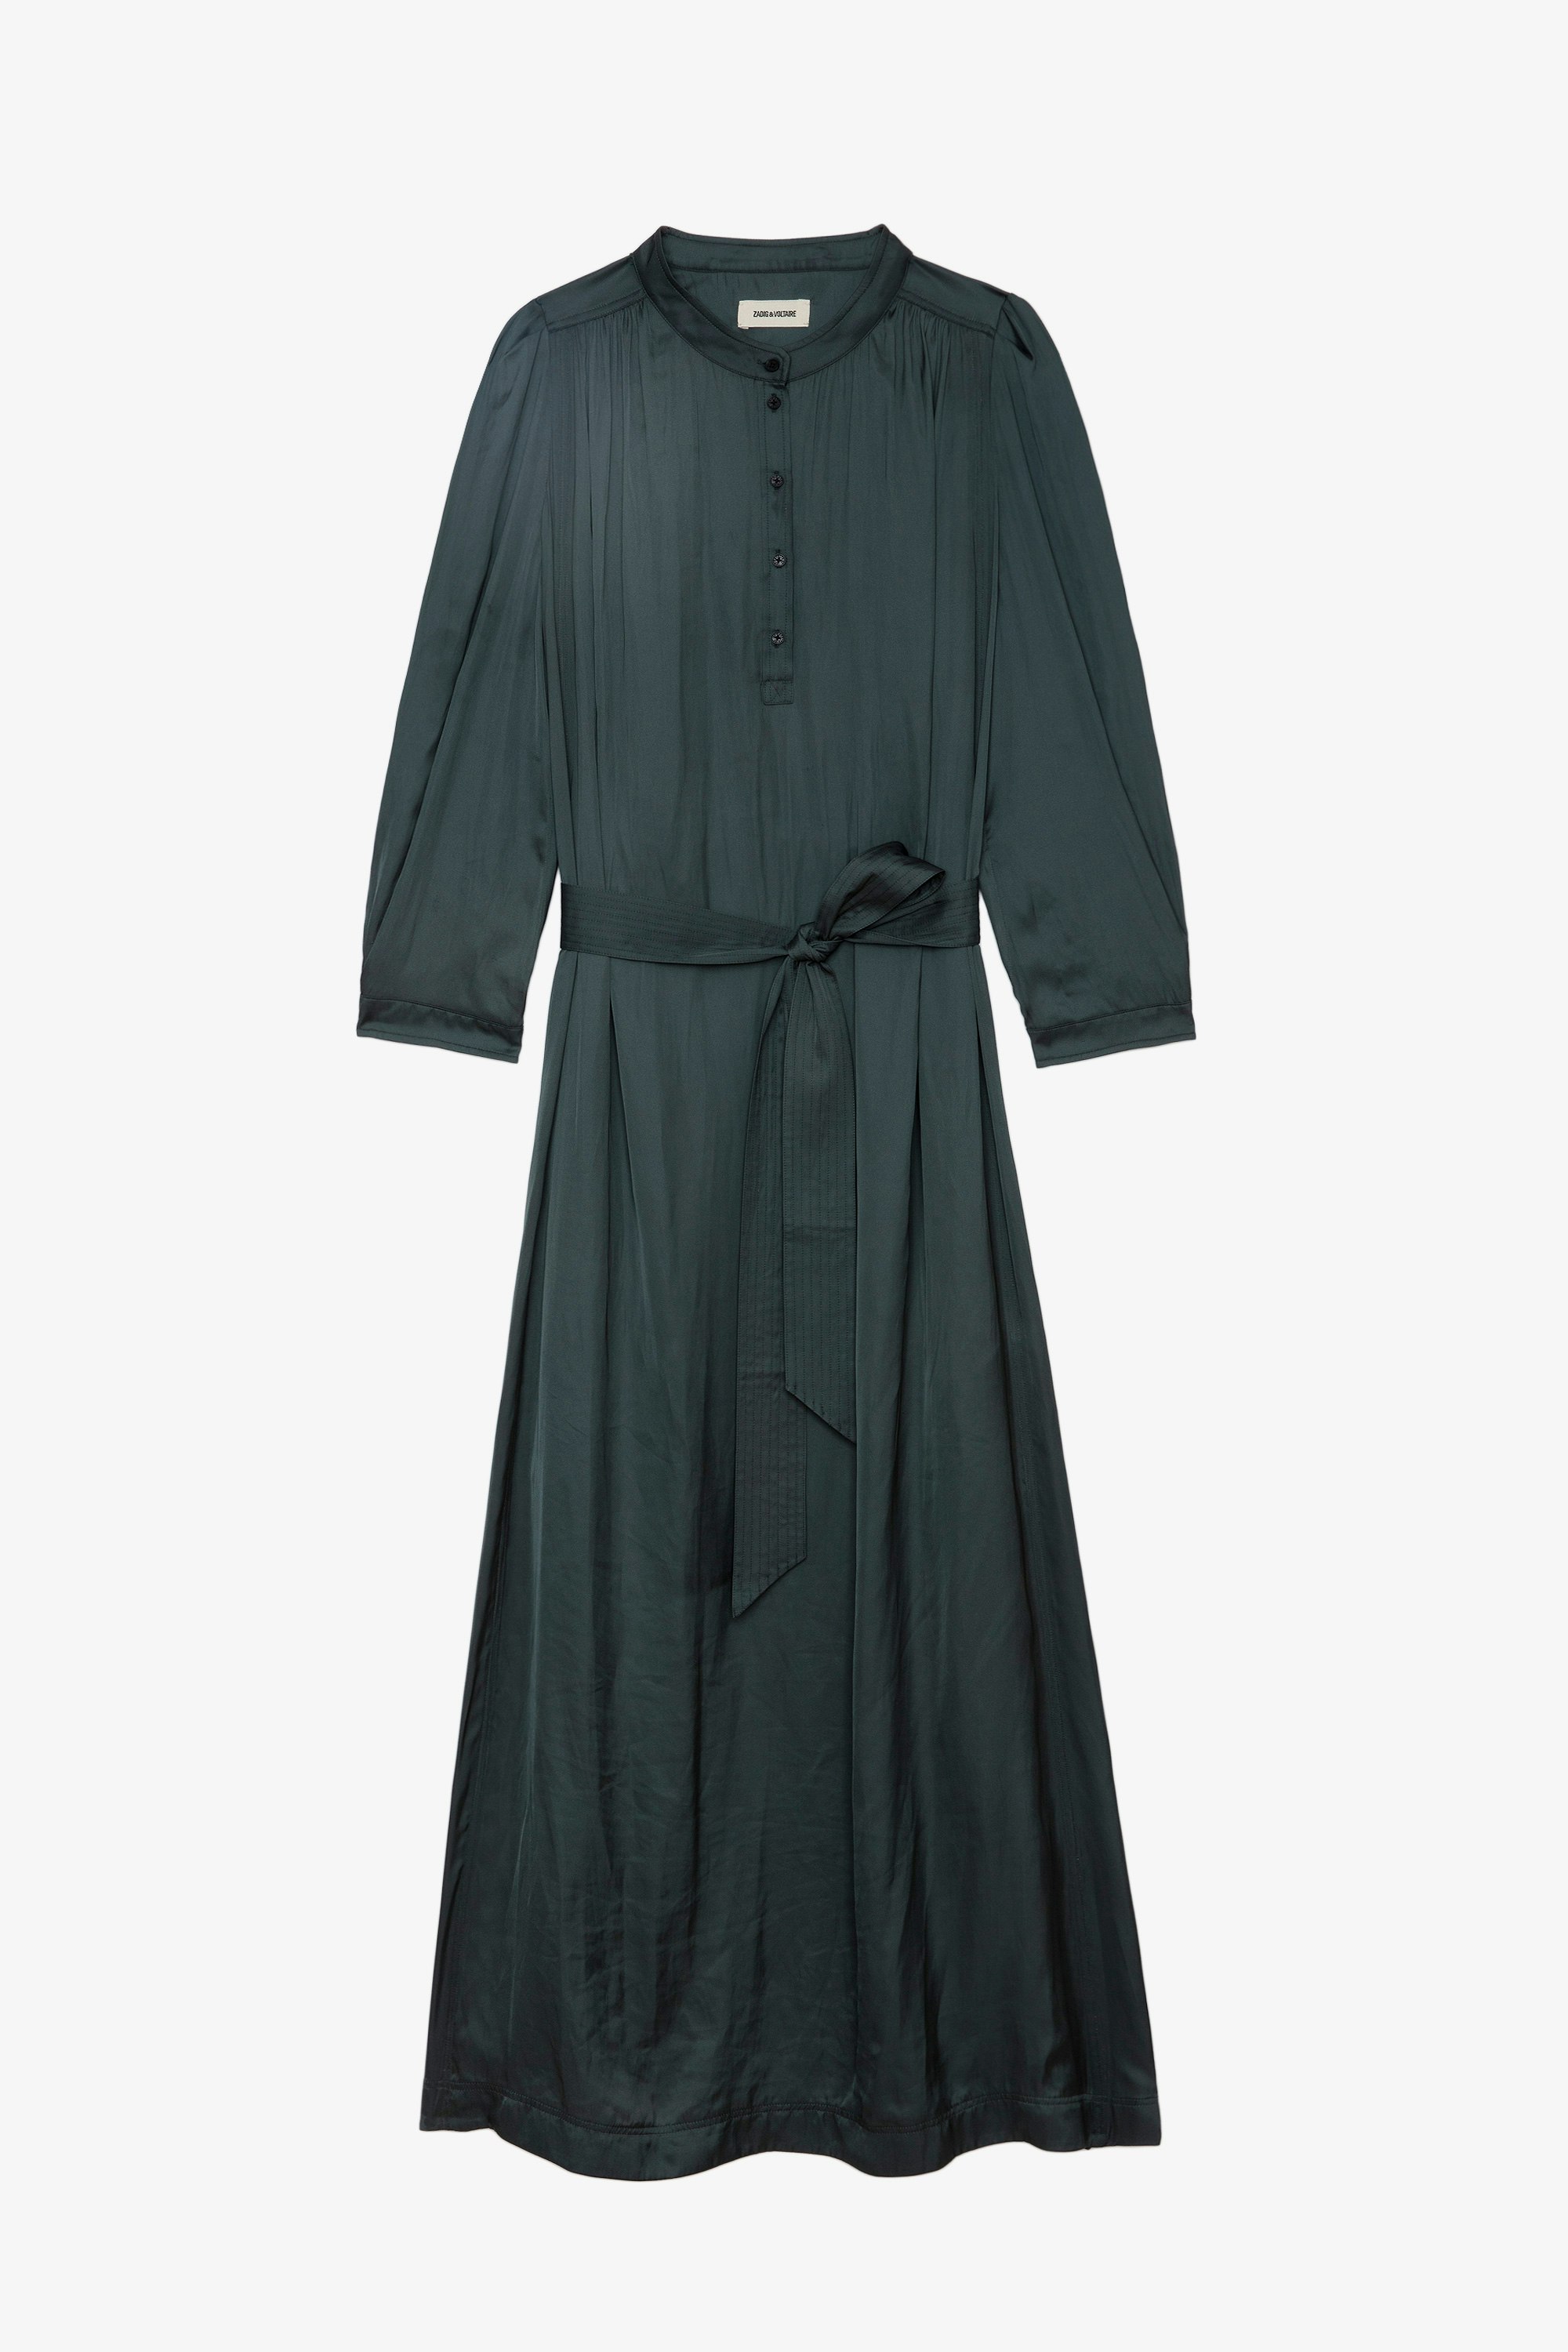 Ritchil Satin Dress - Black satin long dress with 3/4-length sleeves and tie at the waist.